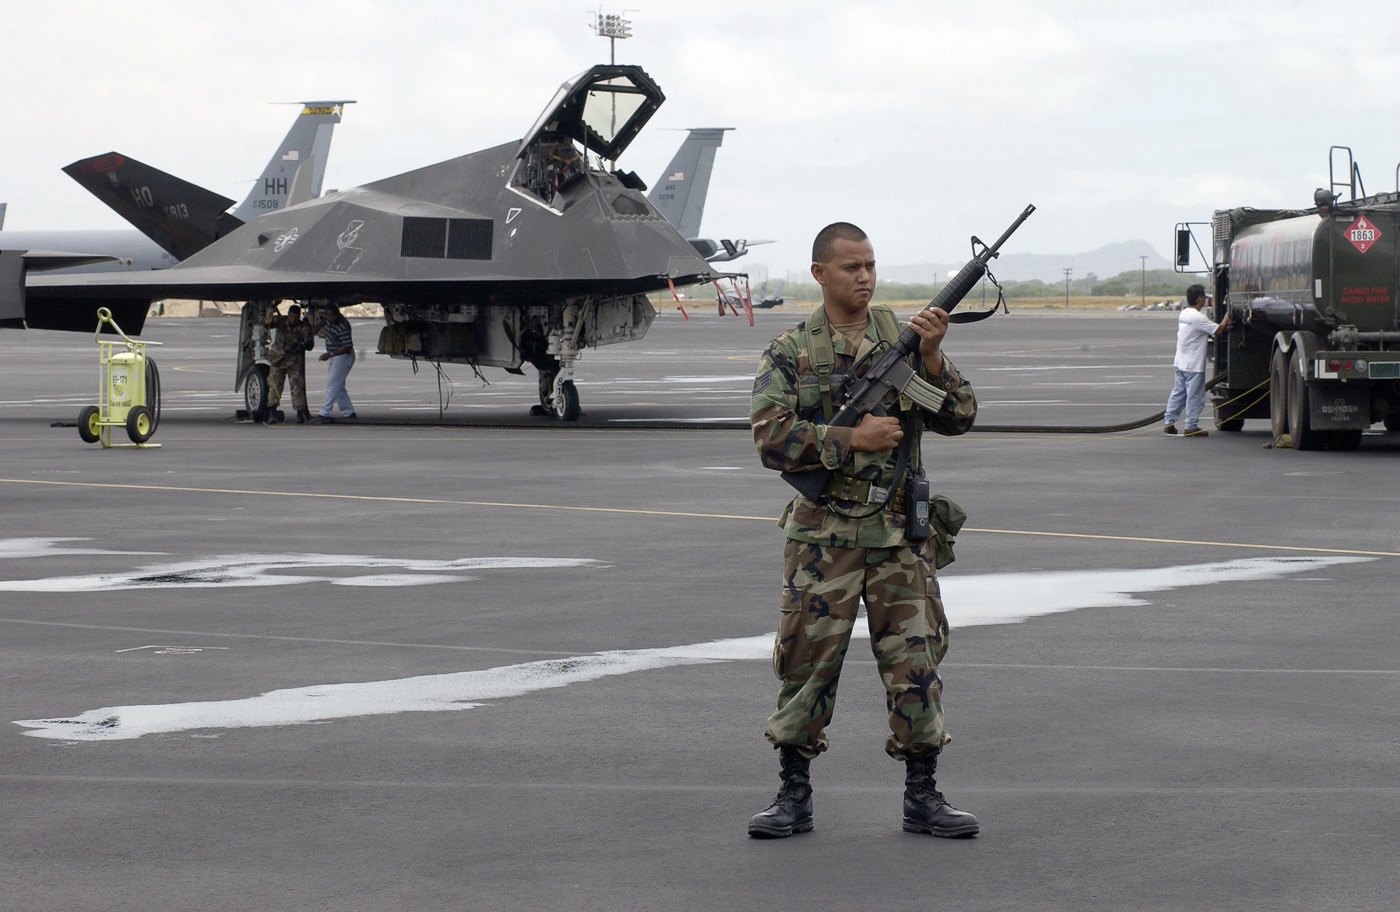 f-117 on runway guarded by usaf security team